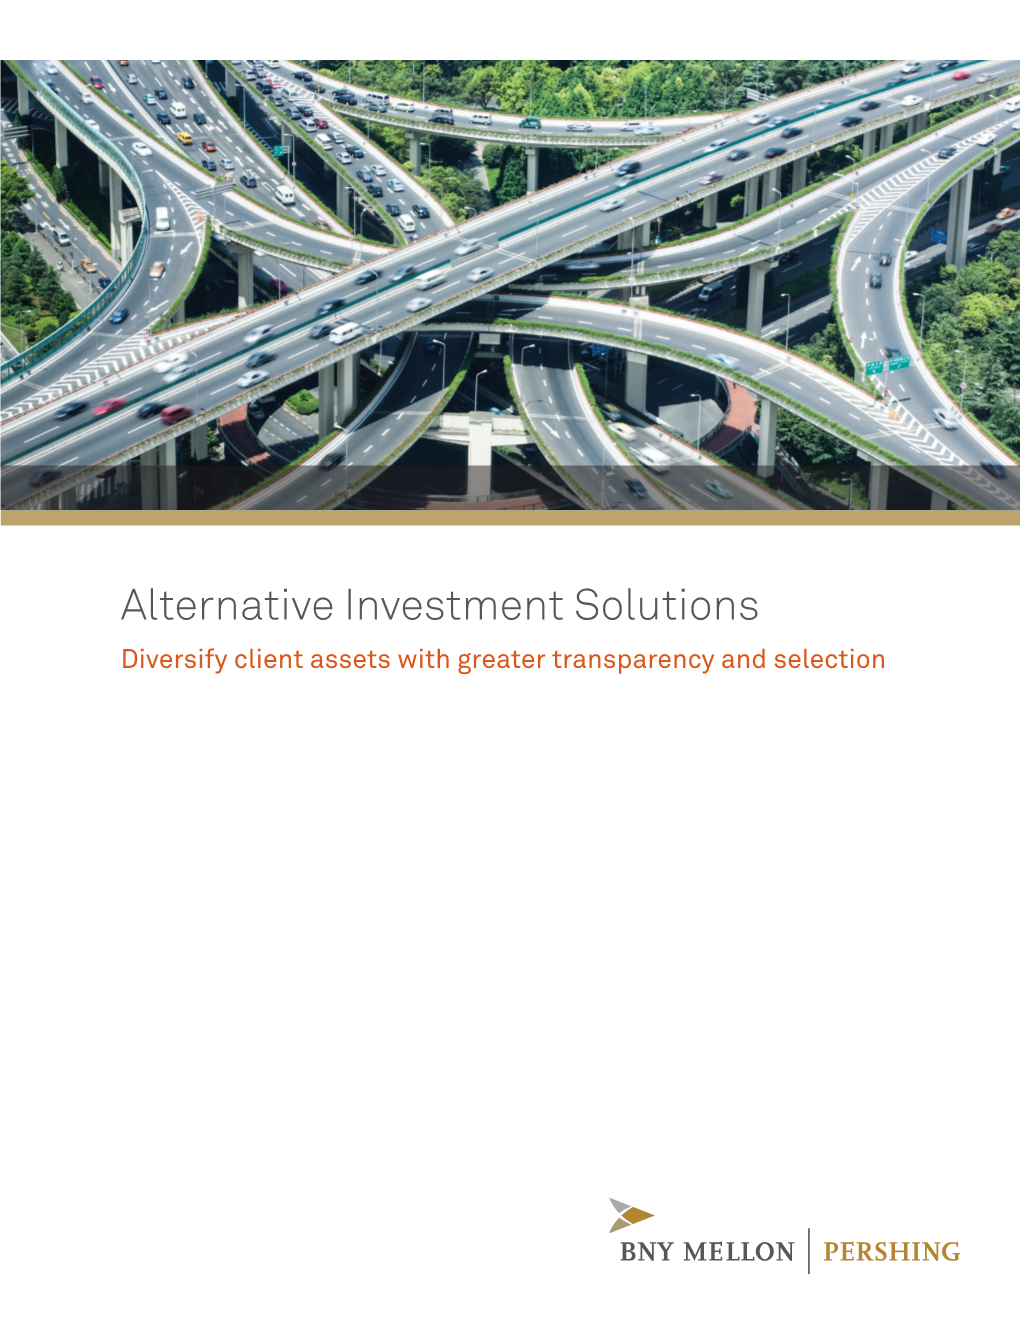 Alternative Investment Solutions Diversify Client Assets with Greater Transparency and Selection Meet Investor Demand by Diversifying with Alternative Investments